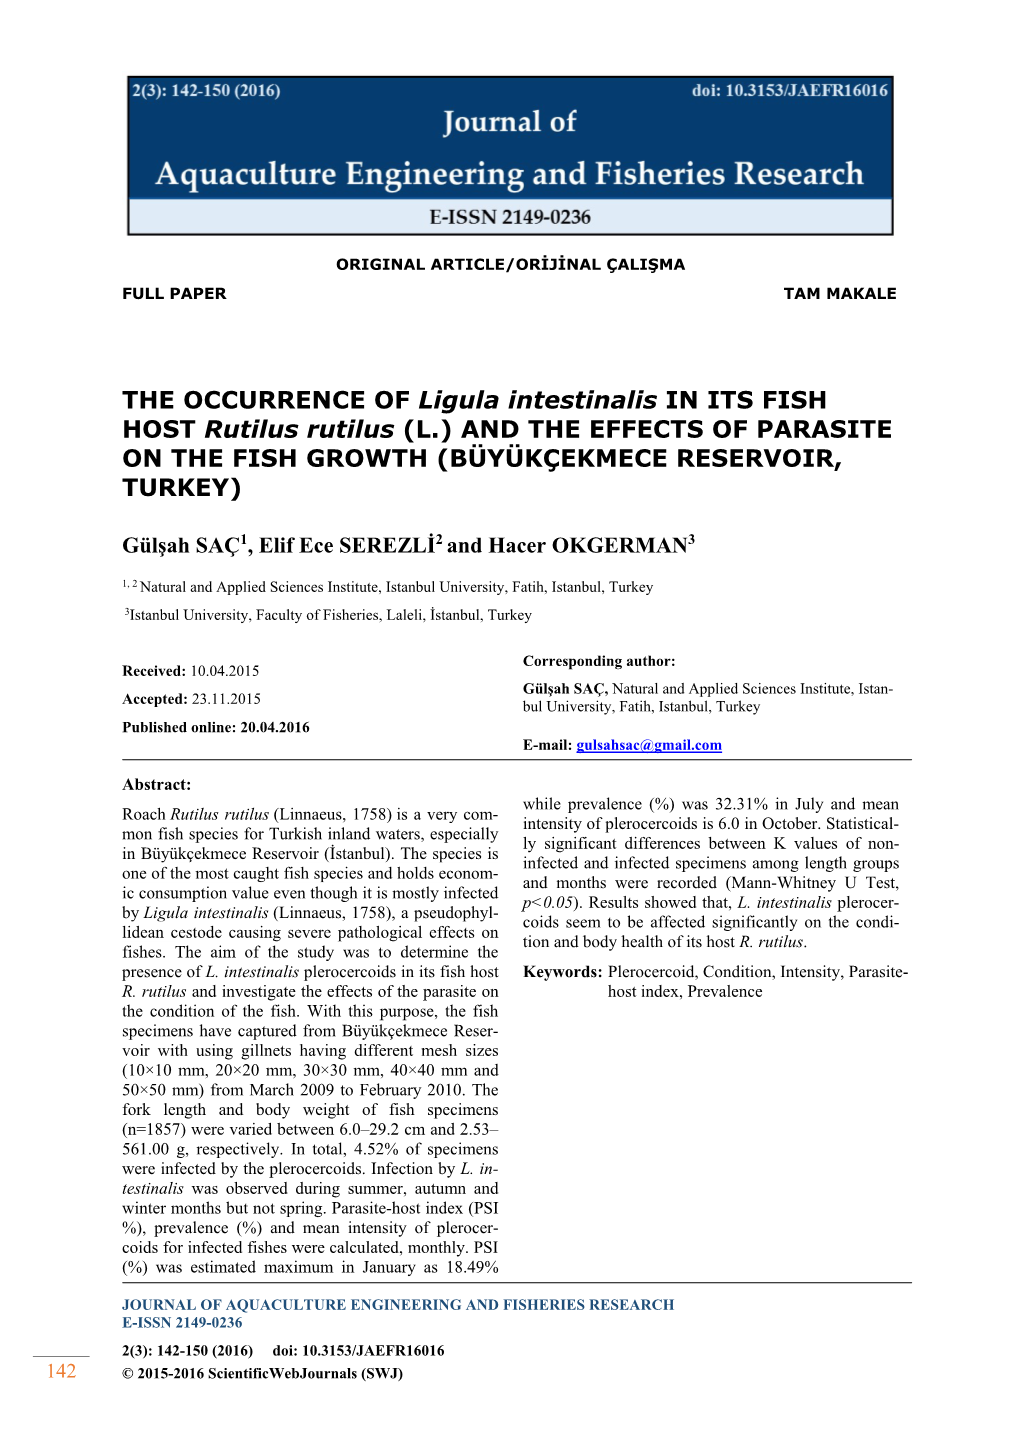 THE OCCURRENCE of Ligula Intestinalis in ITS FISH HOST Rutilus Rutilus (L.) and the EFFECTS of PARASITE on the FISH GROWTH (BÜYÜKÇEKMECE RESERVOIR, TURKEY)